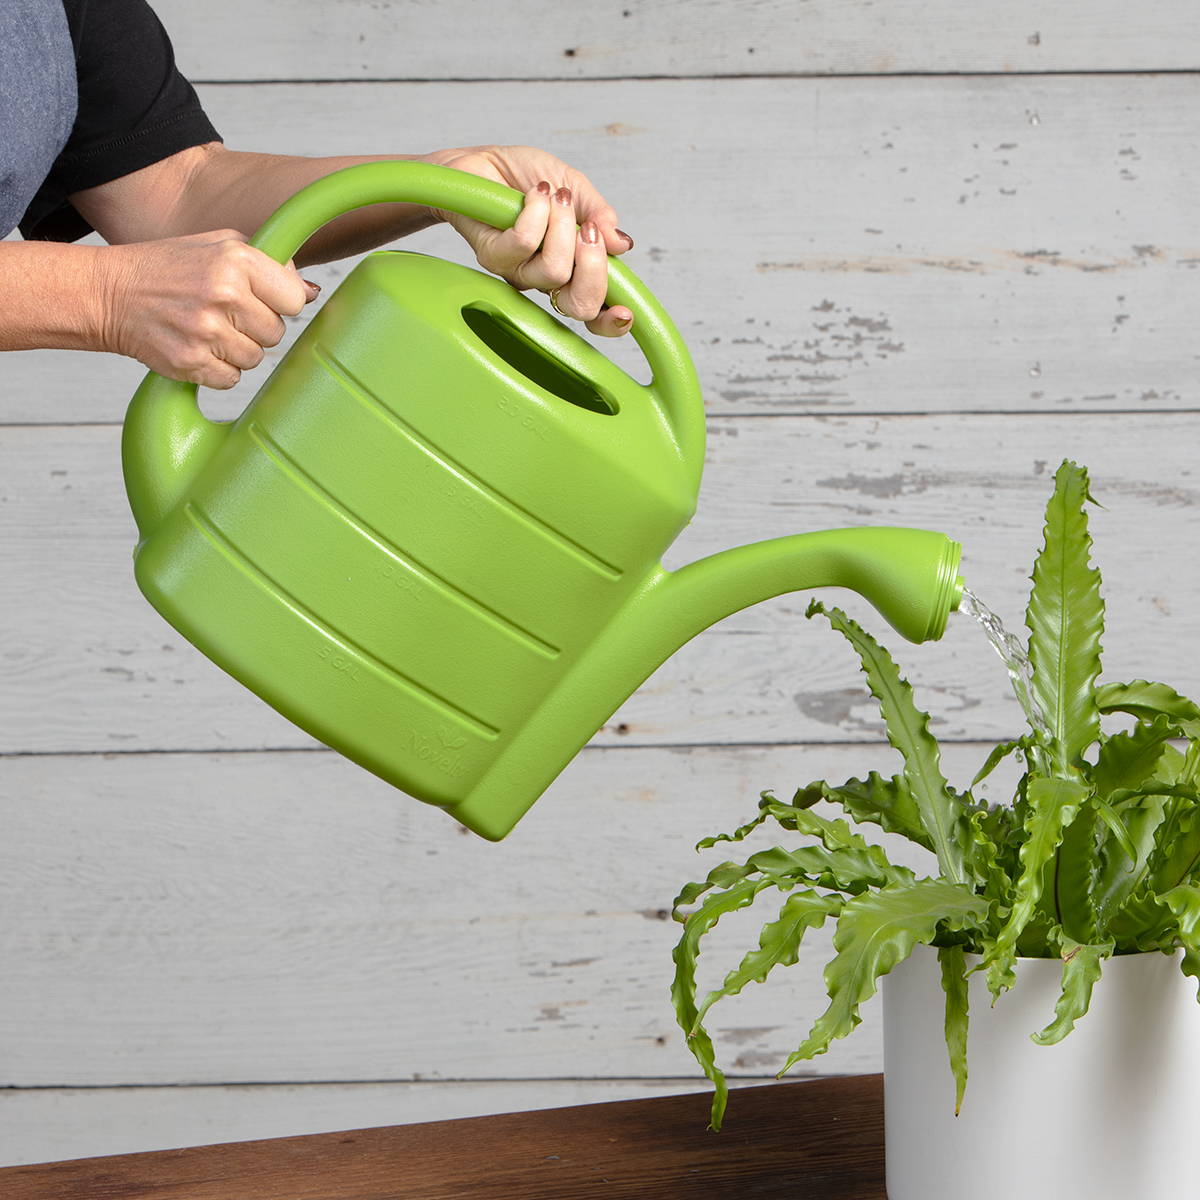 Person using a green 2 gallon deluxe watering can to watering their plants